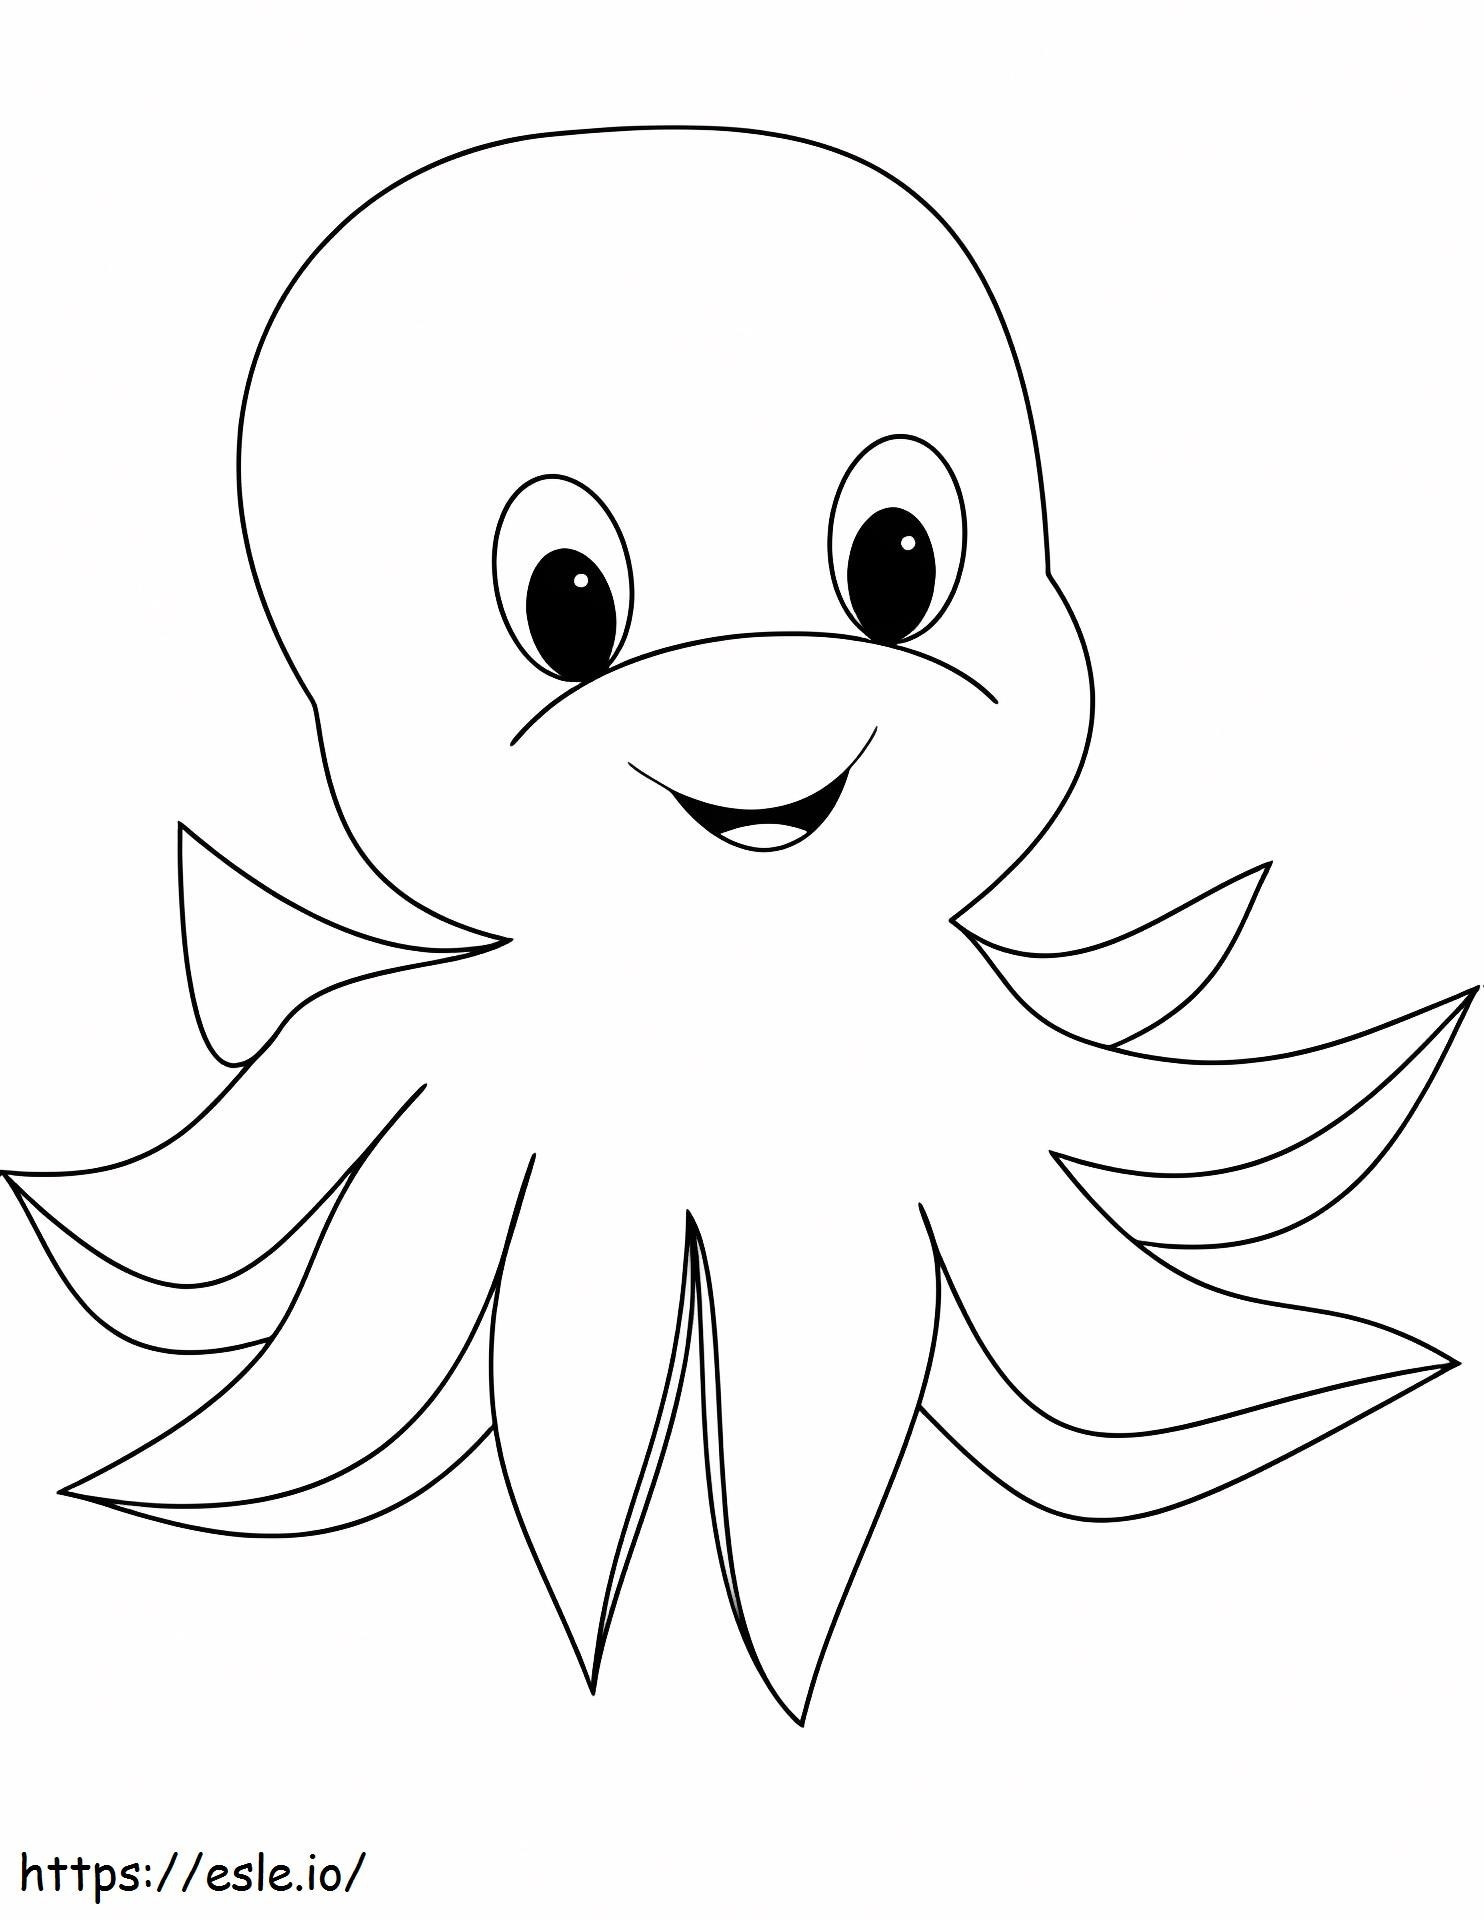 1559547416_Baby Face Octopus A4 coloring page